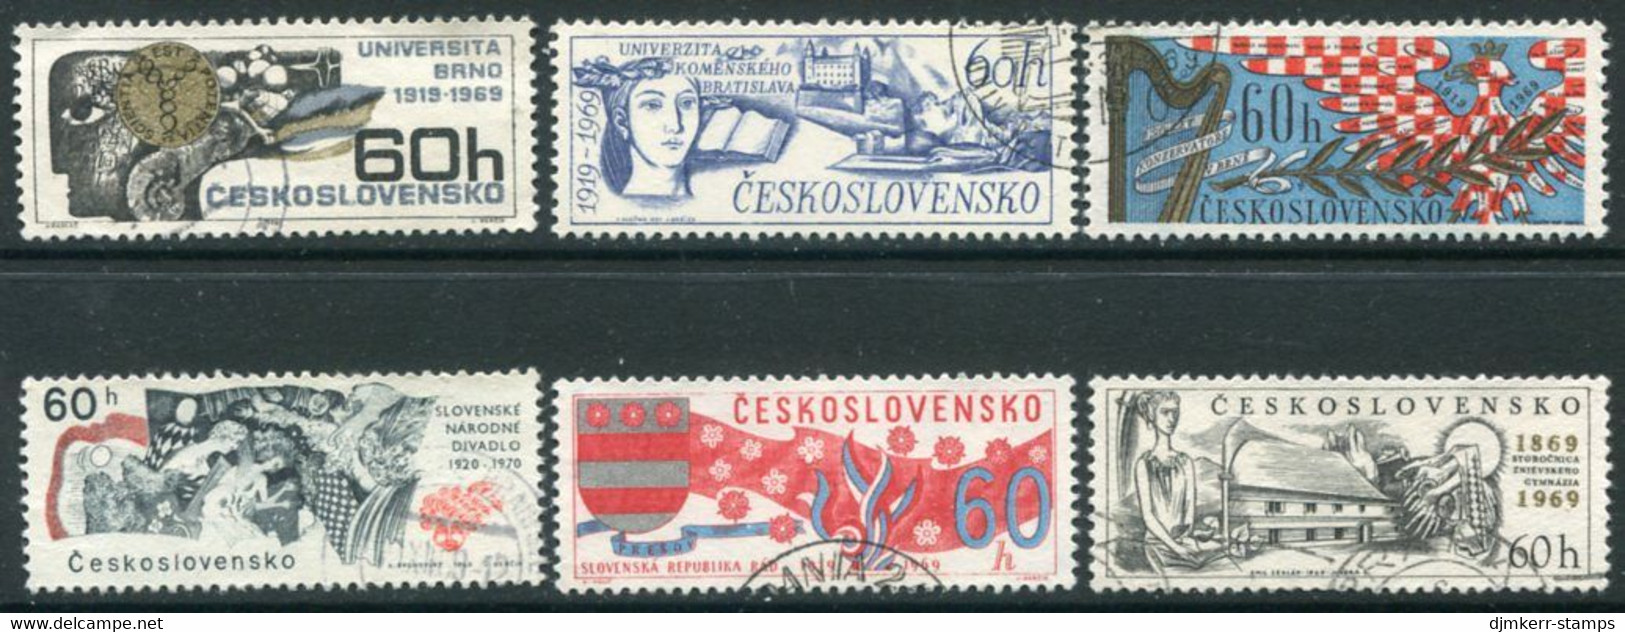 CZECHOSLOVAKIA 1969 Scientific And Cultural Anniversaries Used  Michel 1860-65 - Used Stamps